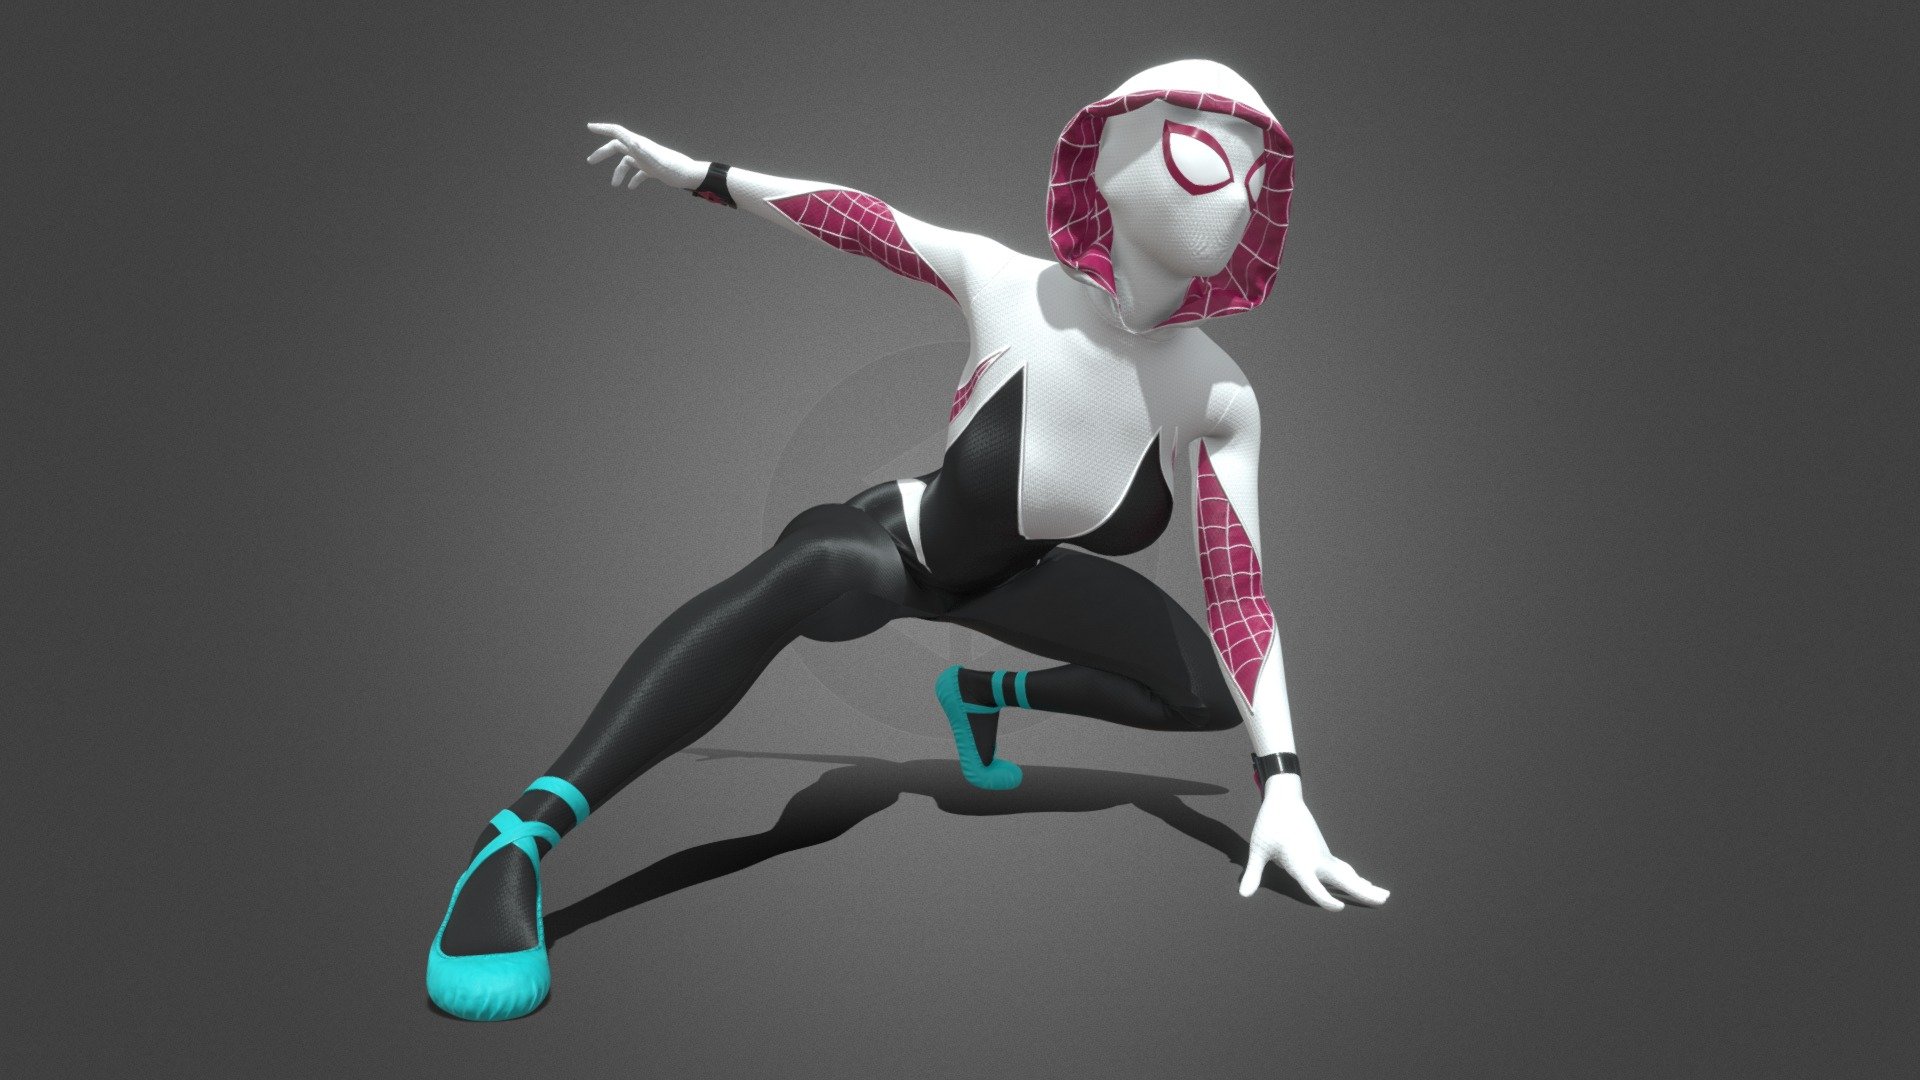 The model is made for 3D printing

You can buy this and other models for printing at the link

https://cults3d.com/en/users/Mini_Print_Studios/3d-models

You can support me with a donation at the link

https://fantalks.io/r/mini_print_stidio
 - Spider Gwen Pose 2 - 3D model by CGIKnights 3d model